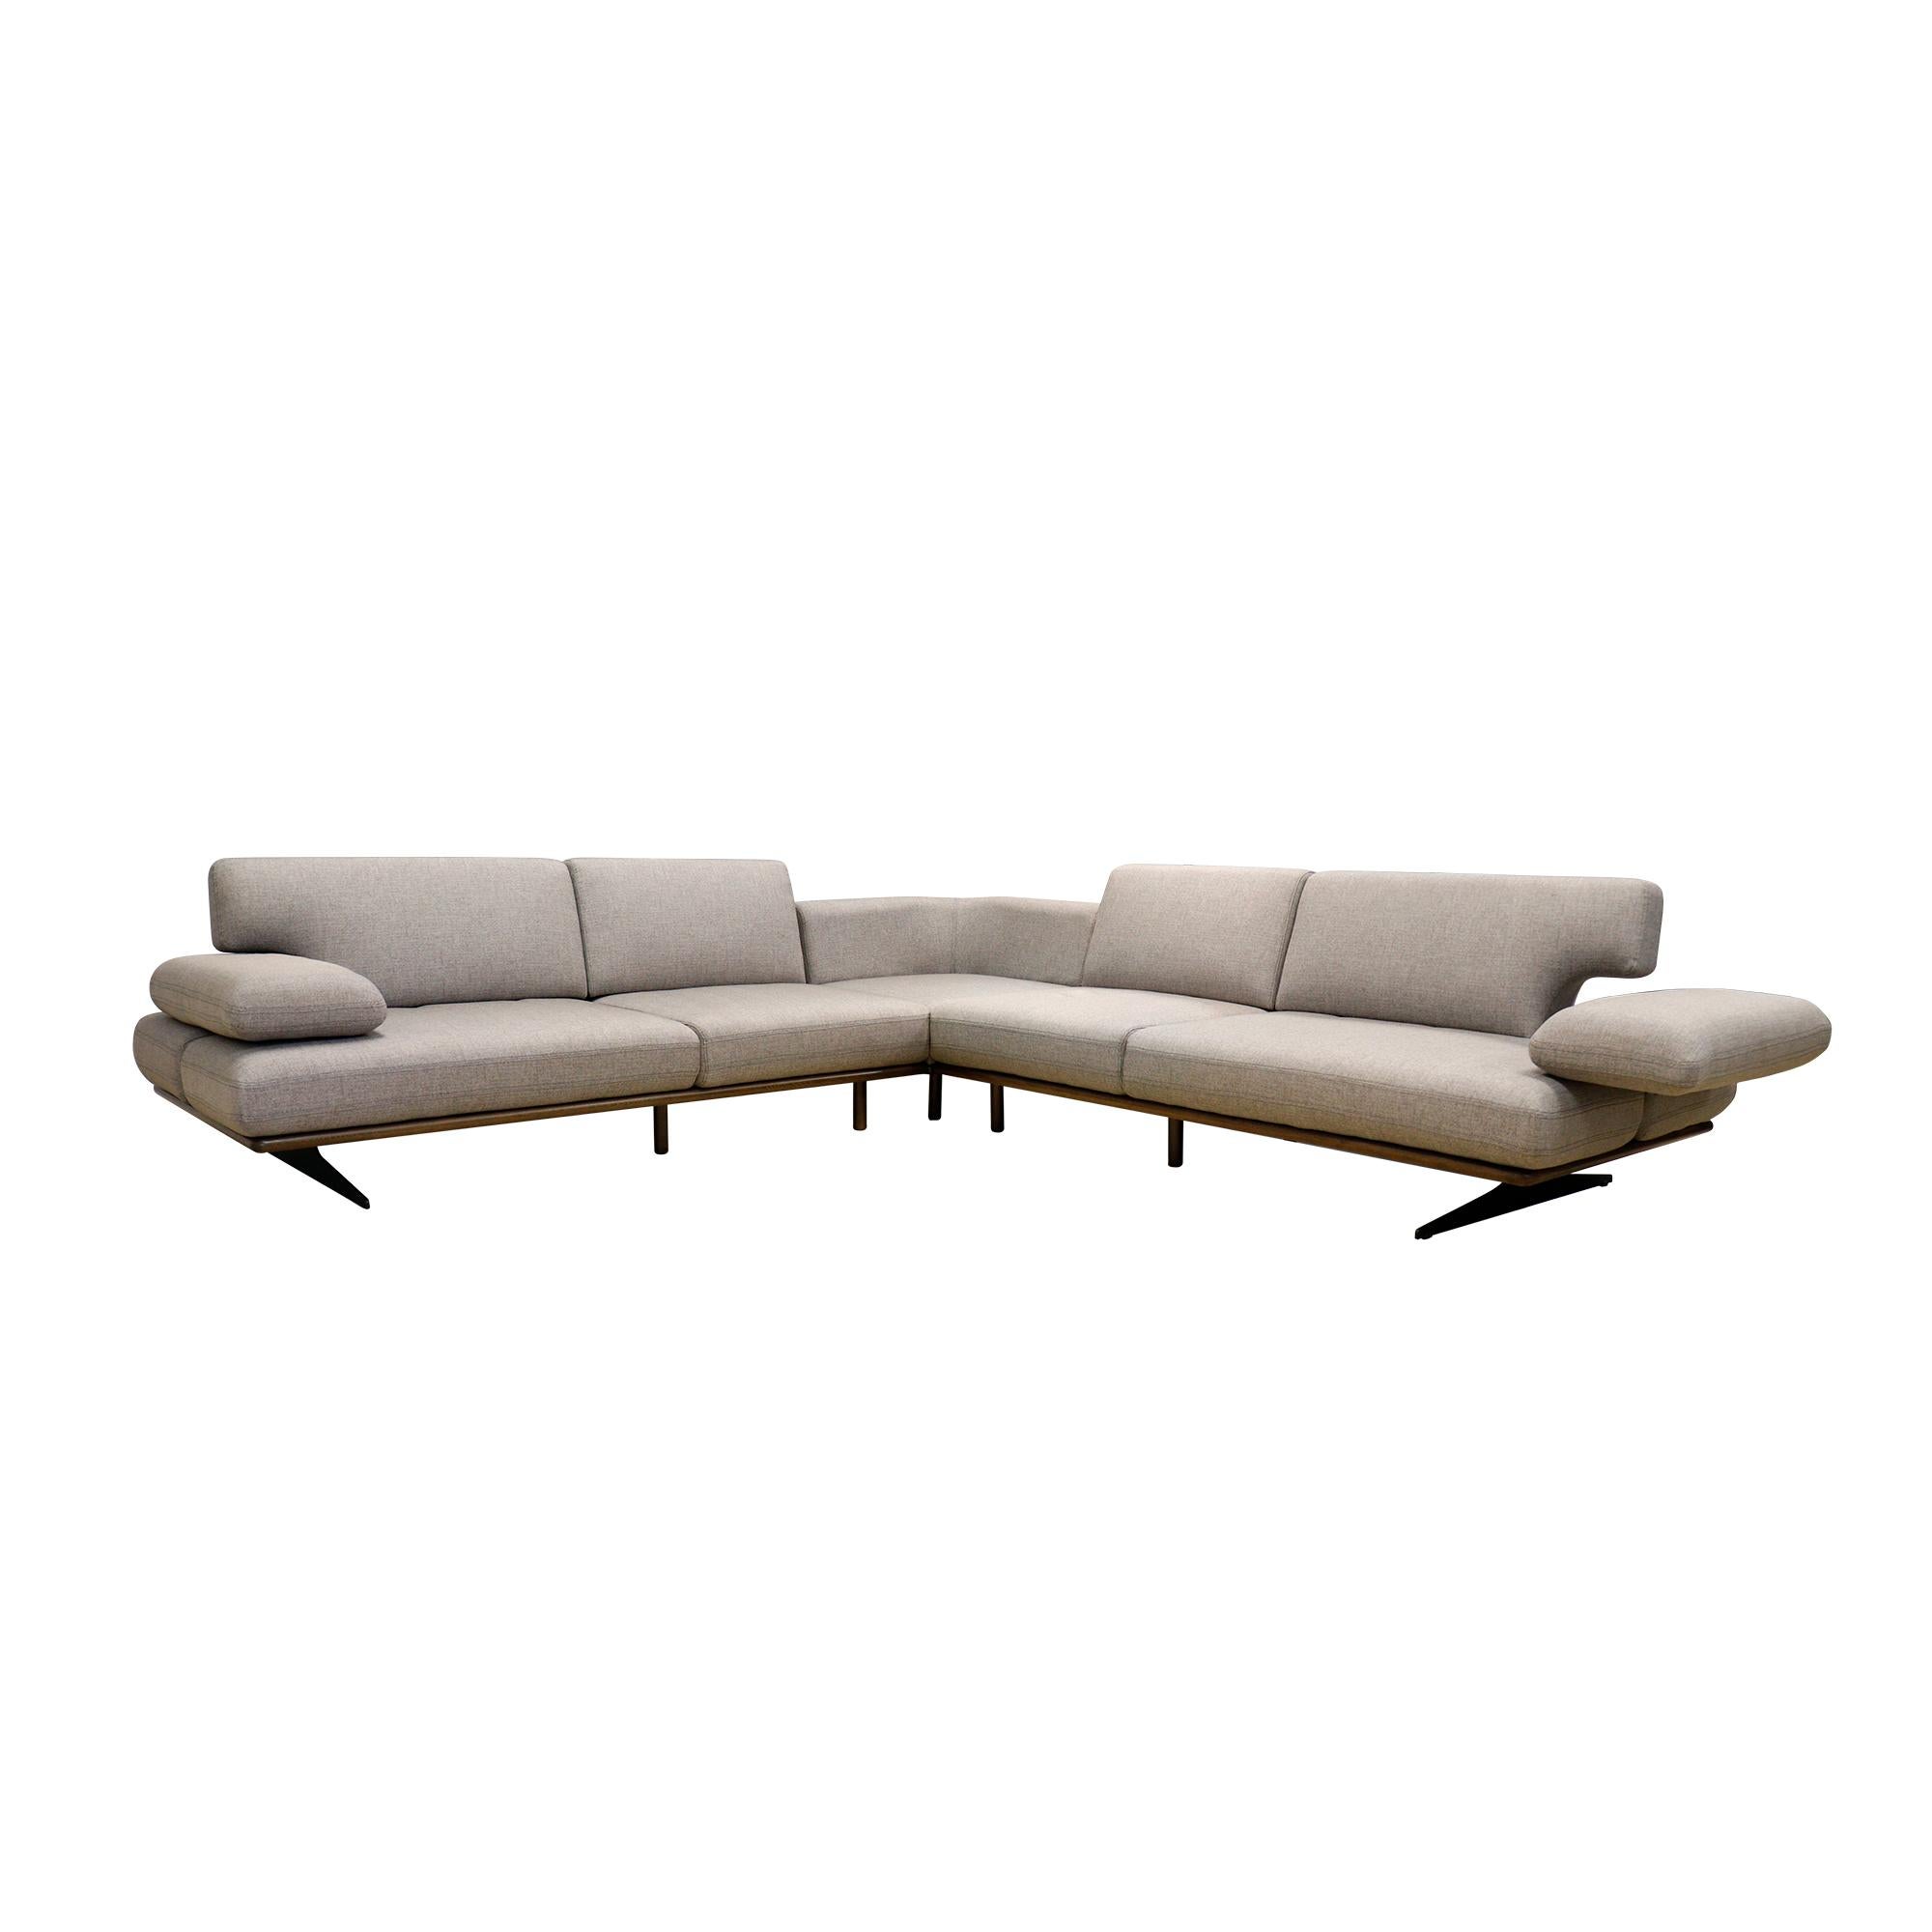 Introducing our impressive Belluno Sofa, a sleek, modern sectional that is as versatile as it is stylish. This low profile, expandable sofa features smooth wing-like arms and back panels which individually slide to adjust to your own custom width